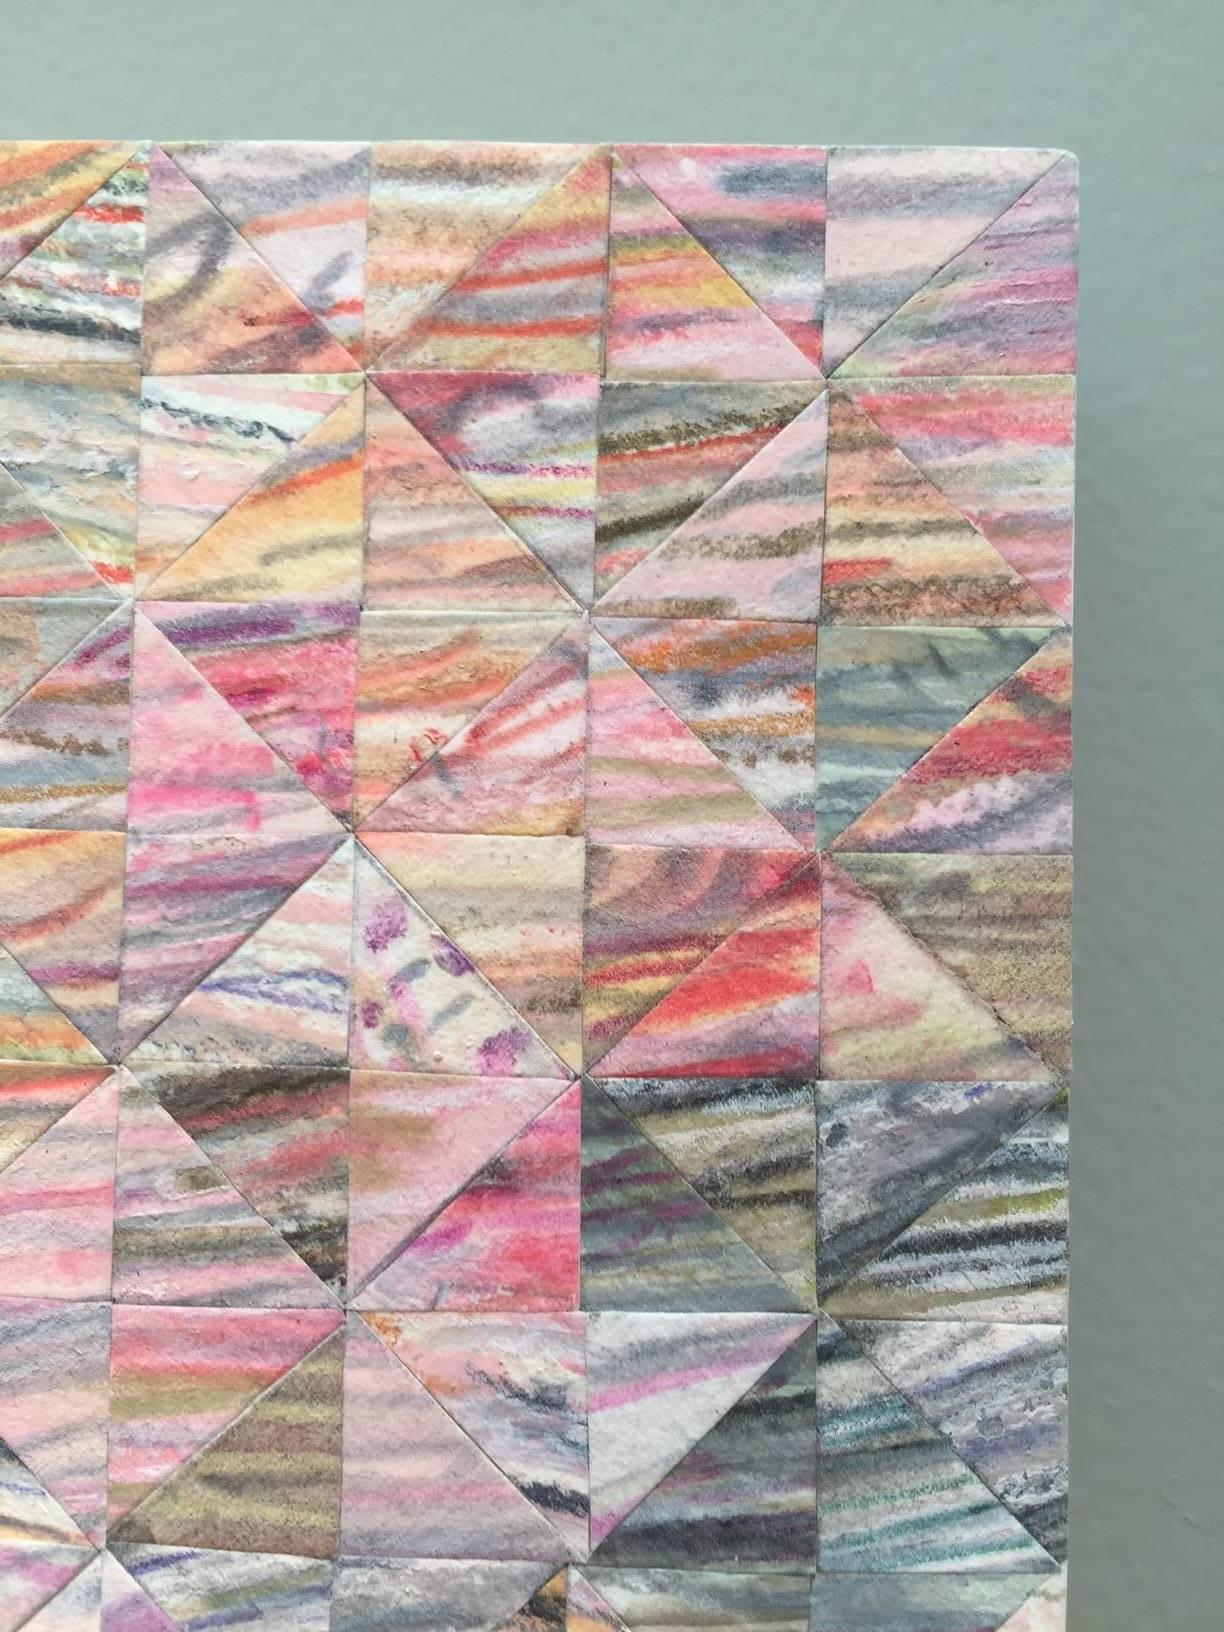 Musically inspired abstract painting on panel, 'Staccato II', by Irene Zweig, blends pink to grey into a horizontal meditative work of art. 13 1/2 x 39 inches. The painting is created on a professionally constructed, minimal, light wood panel that